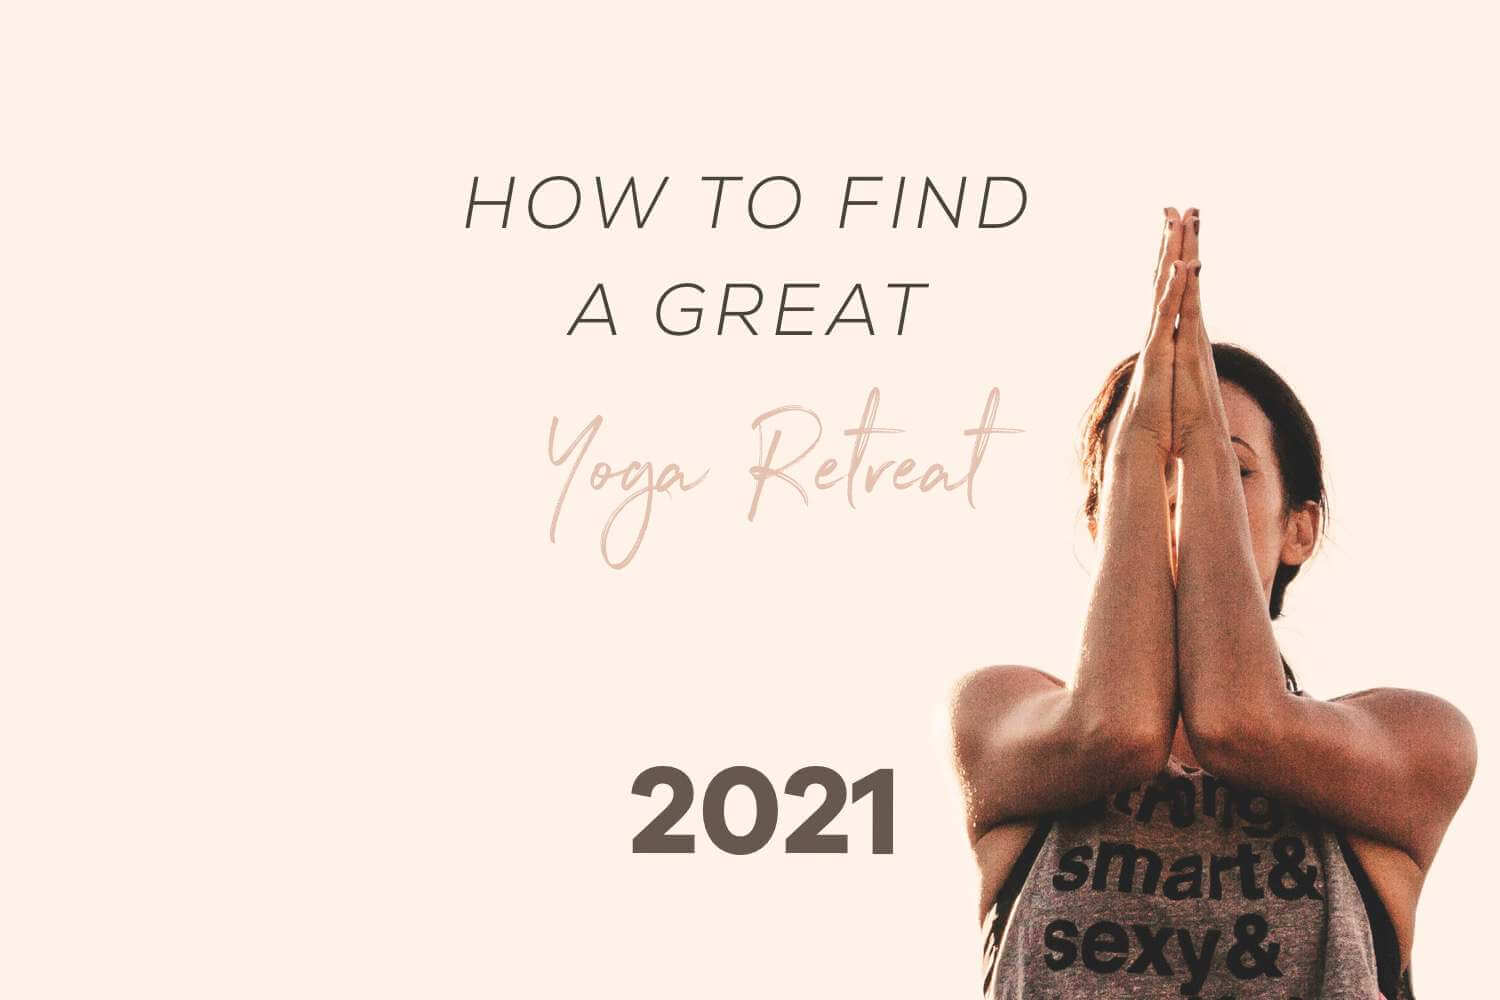 How to find a good yoga retreat 2021?